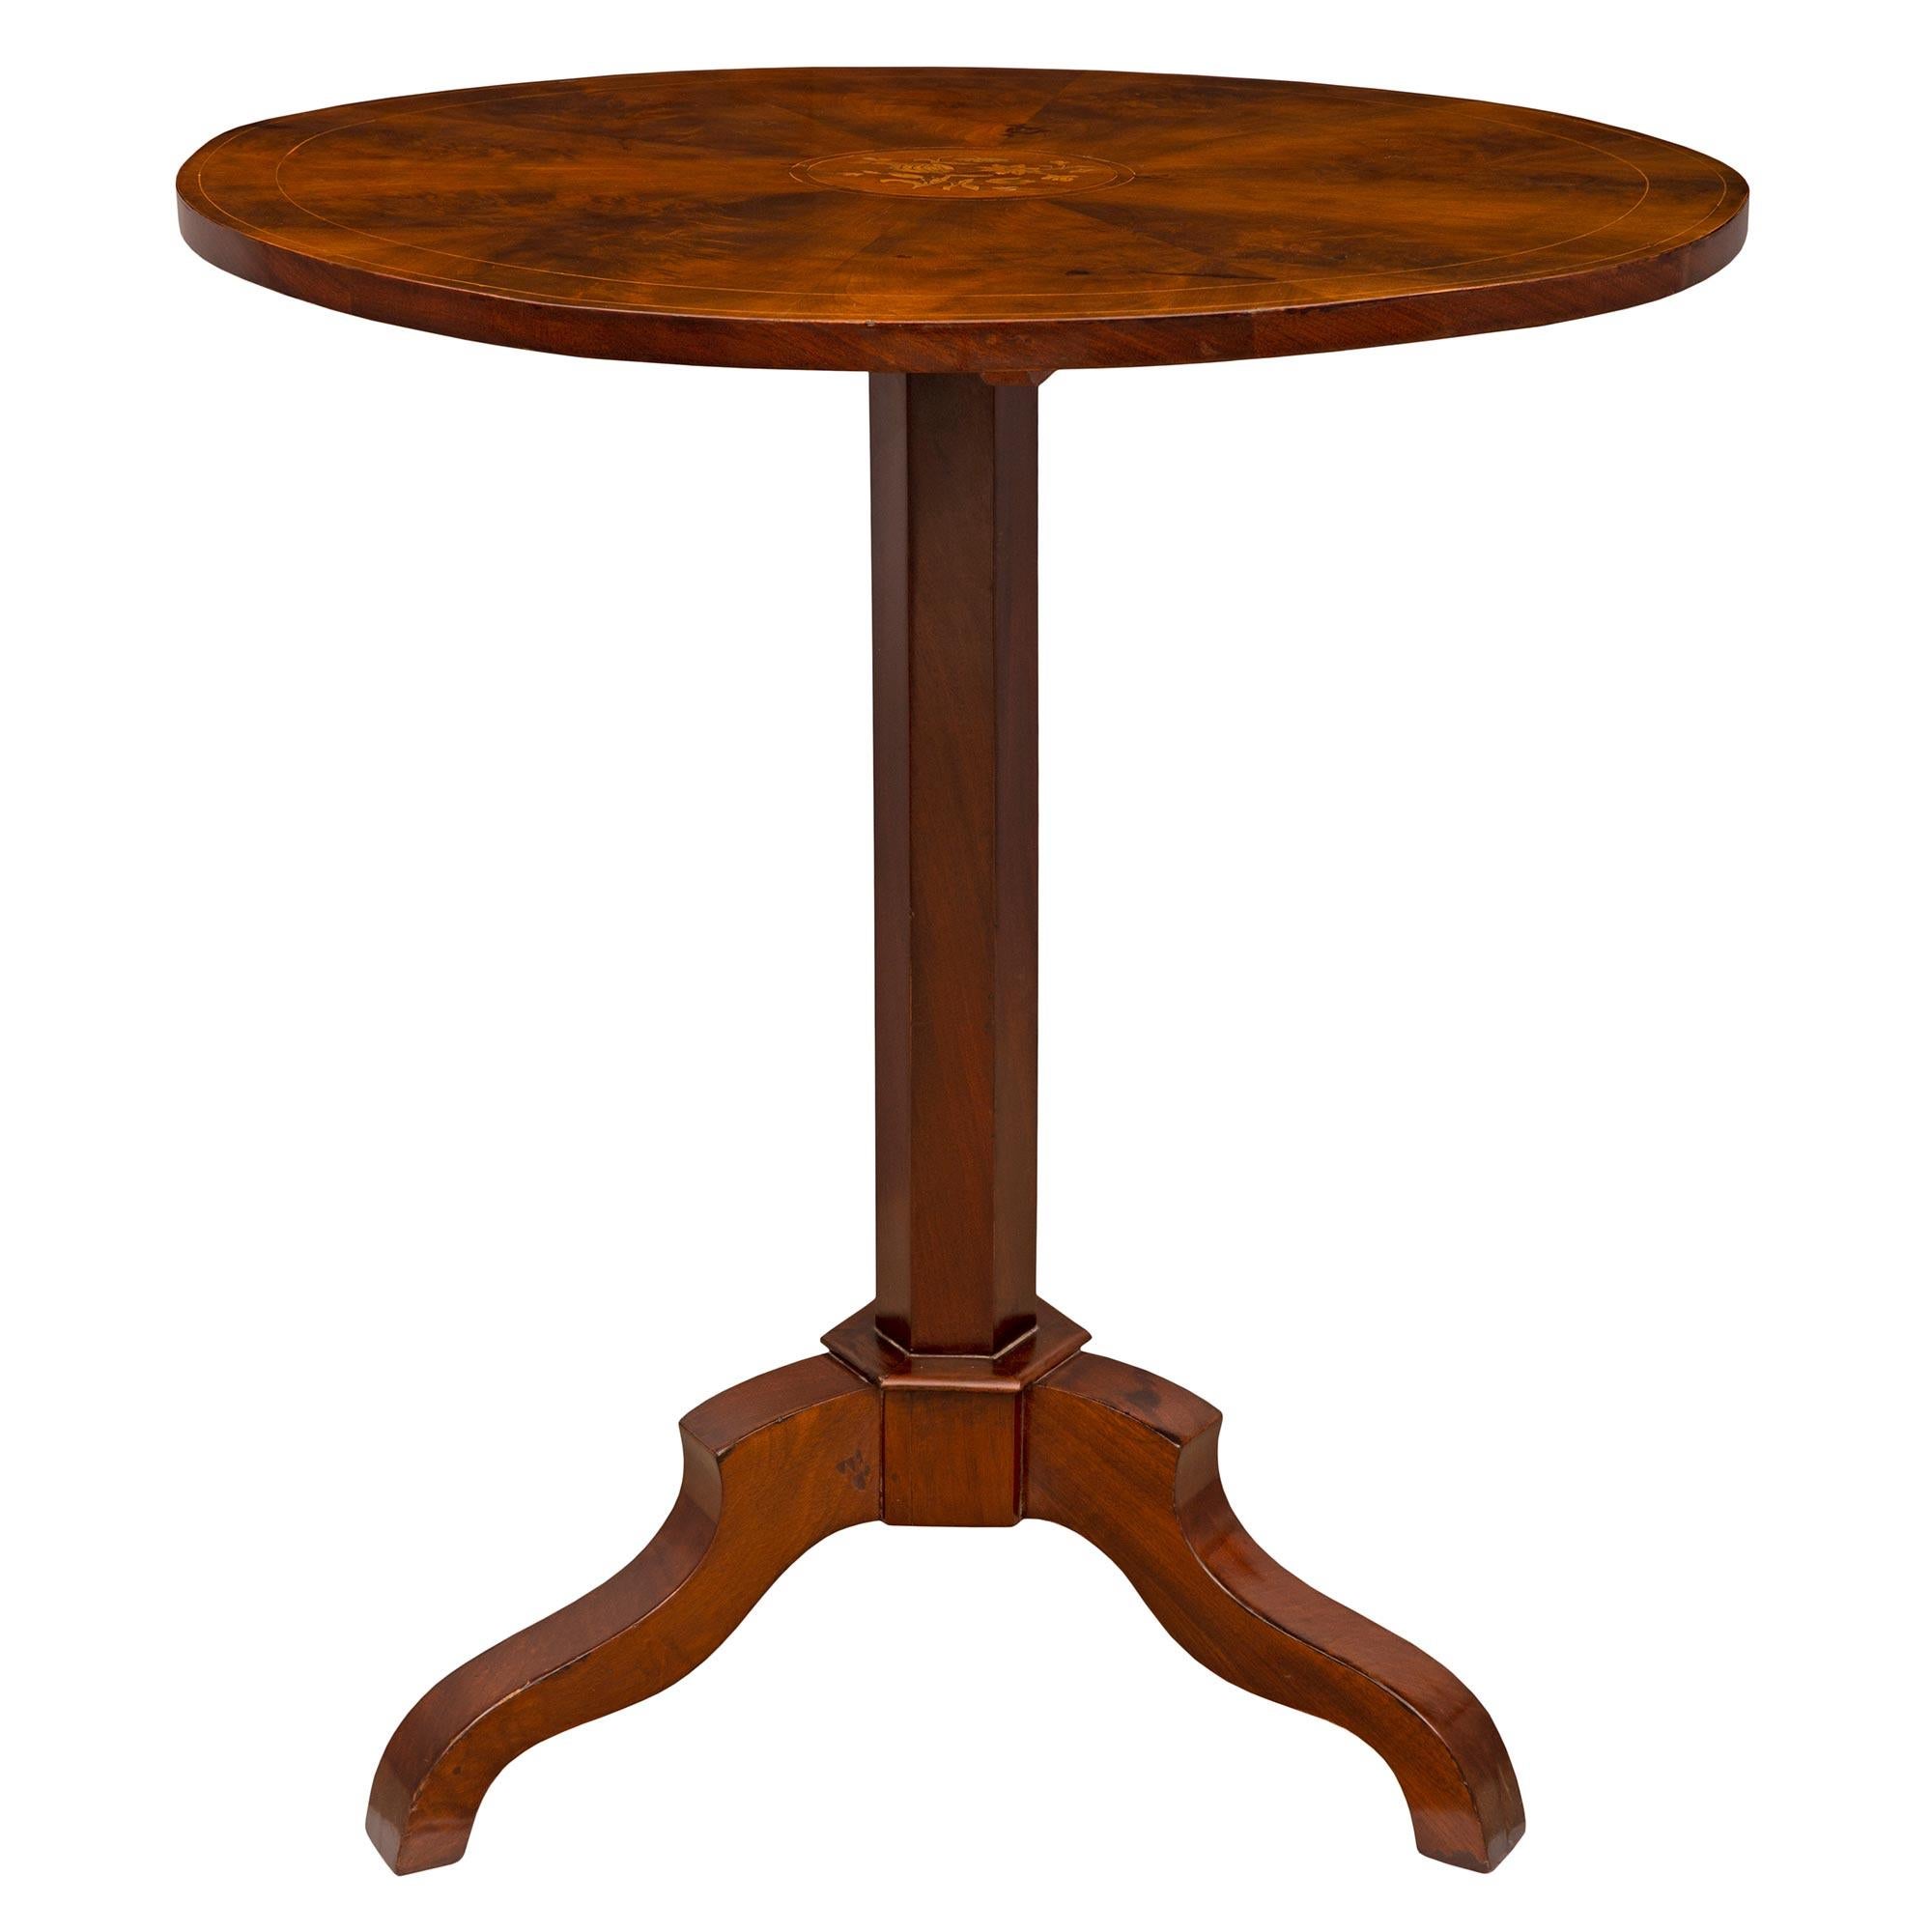 An elegant and small scale French 19th century Charles X period flamed Mahogany and Tulipwood tilt top side table. The circular table is raised by three finely scrolled supports joined at a hexagonal reserve and central support. The top tilts up via